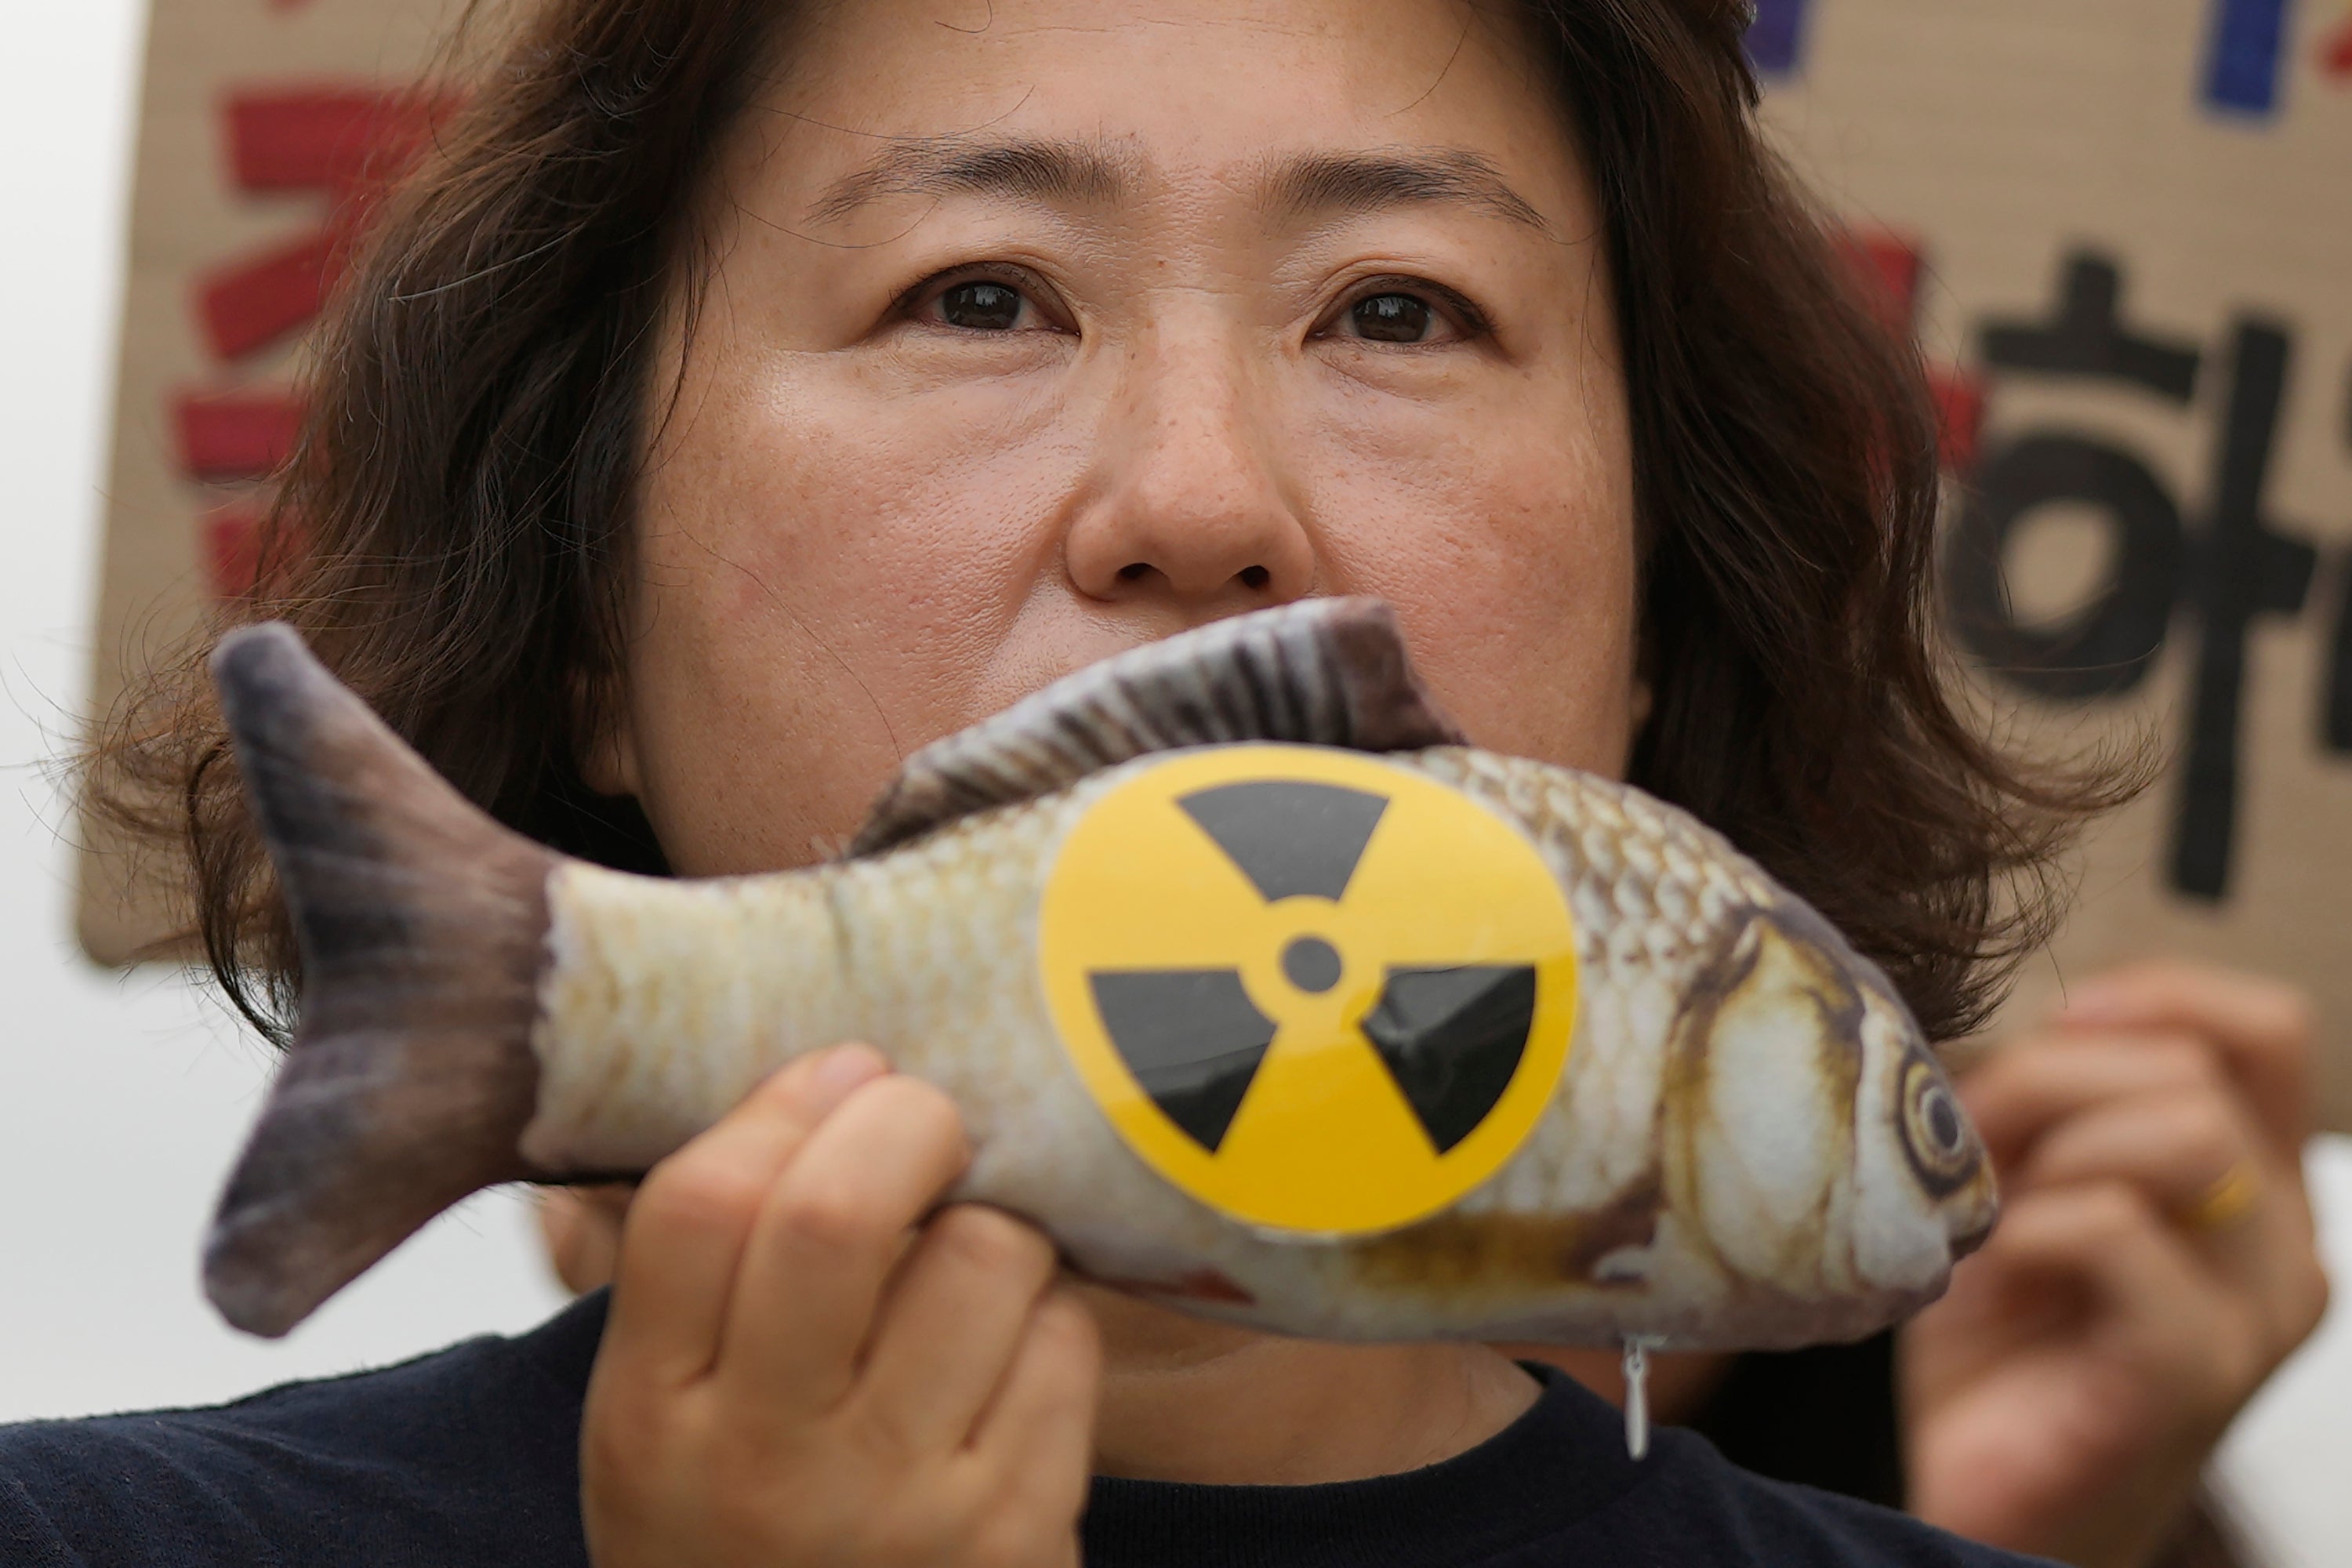 In Japans neighbors, fear and frustration are being shared over radioactive water release The Independent picture